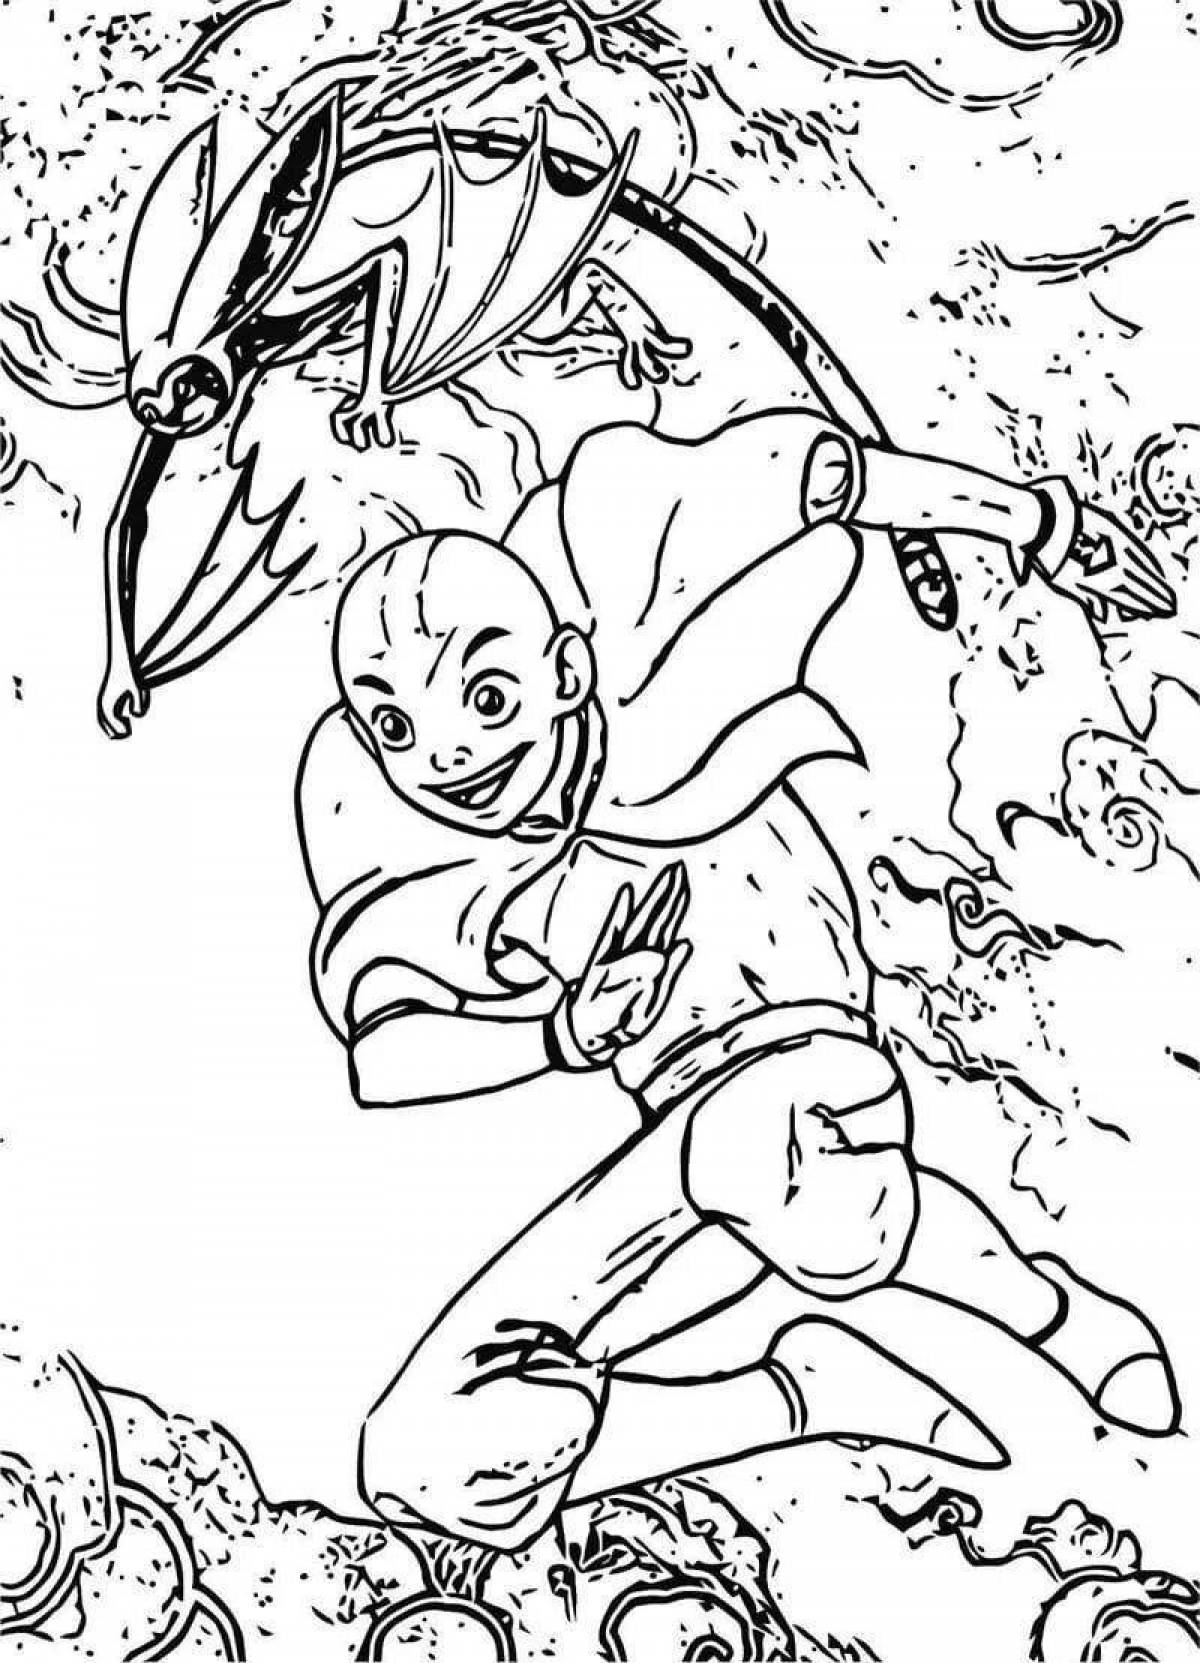 Adorable Avatar: The Last Airbender Coloring Page